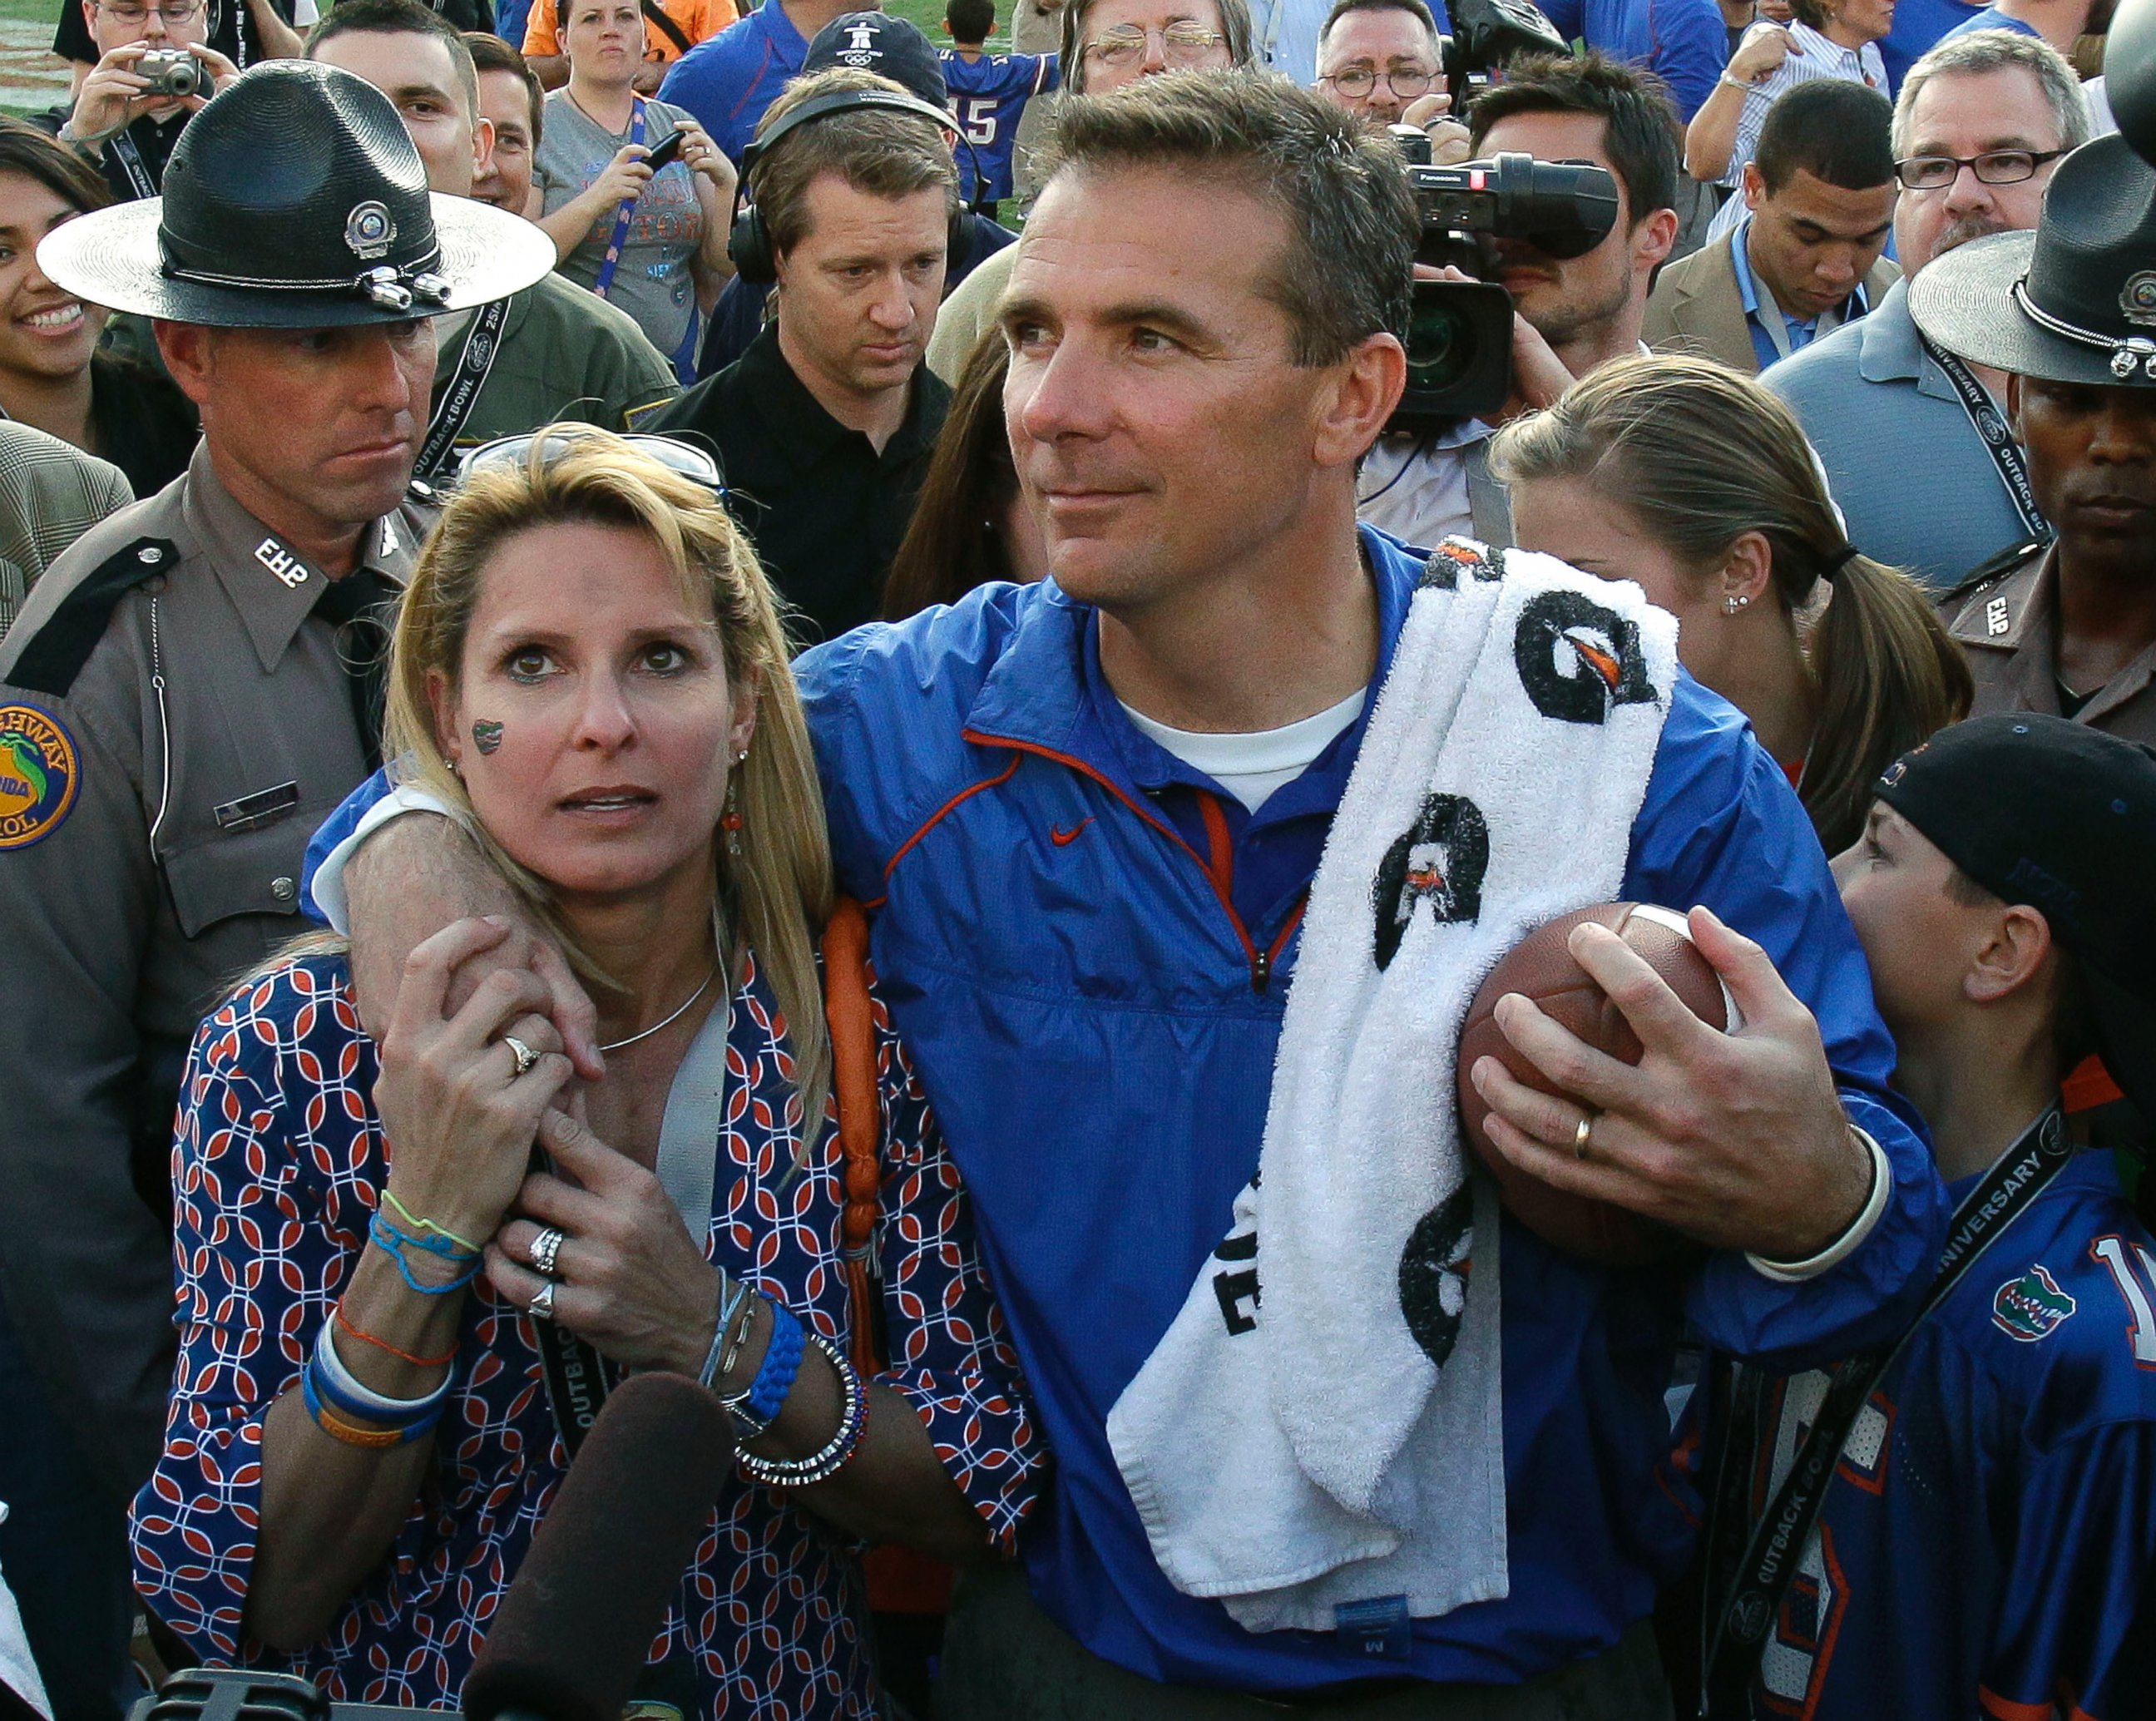 In this Jan. 1, 2011, file photo, then-Florida head coach Urban Meyer puts his arm around his wife Shelley after Florida defeated Penn State 37-24 in the Outback Bowl NCAA college football game, in Tampa, Fla.